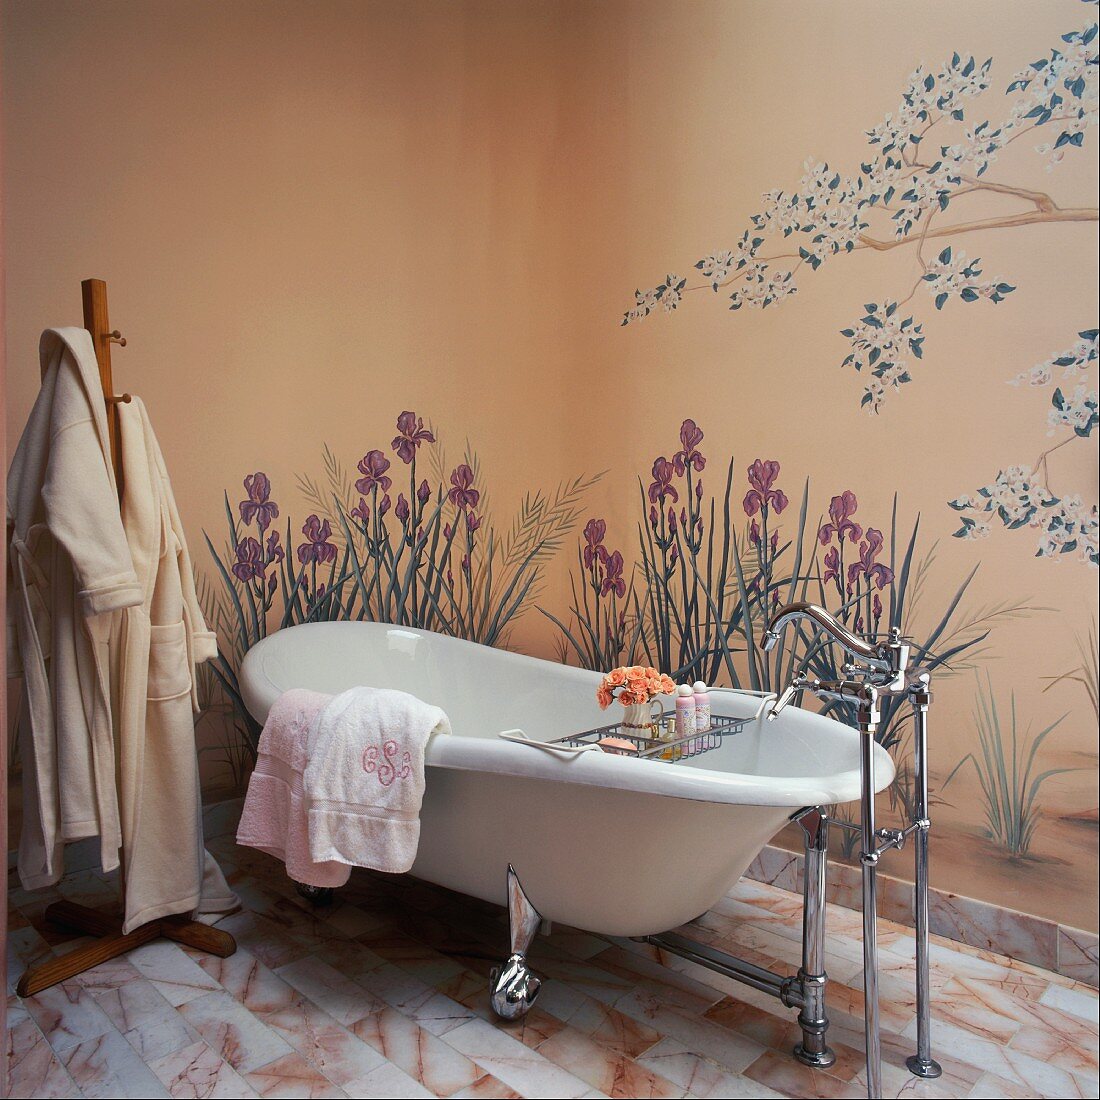 Free-standing bathtub against wall painted with garden flowers